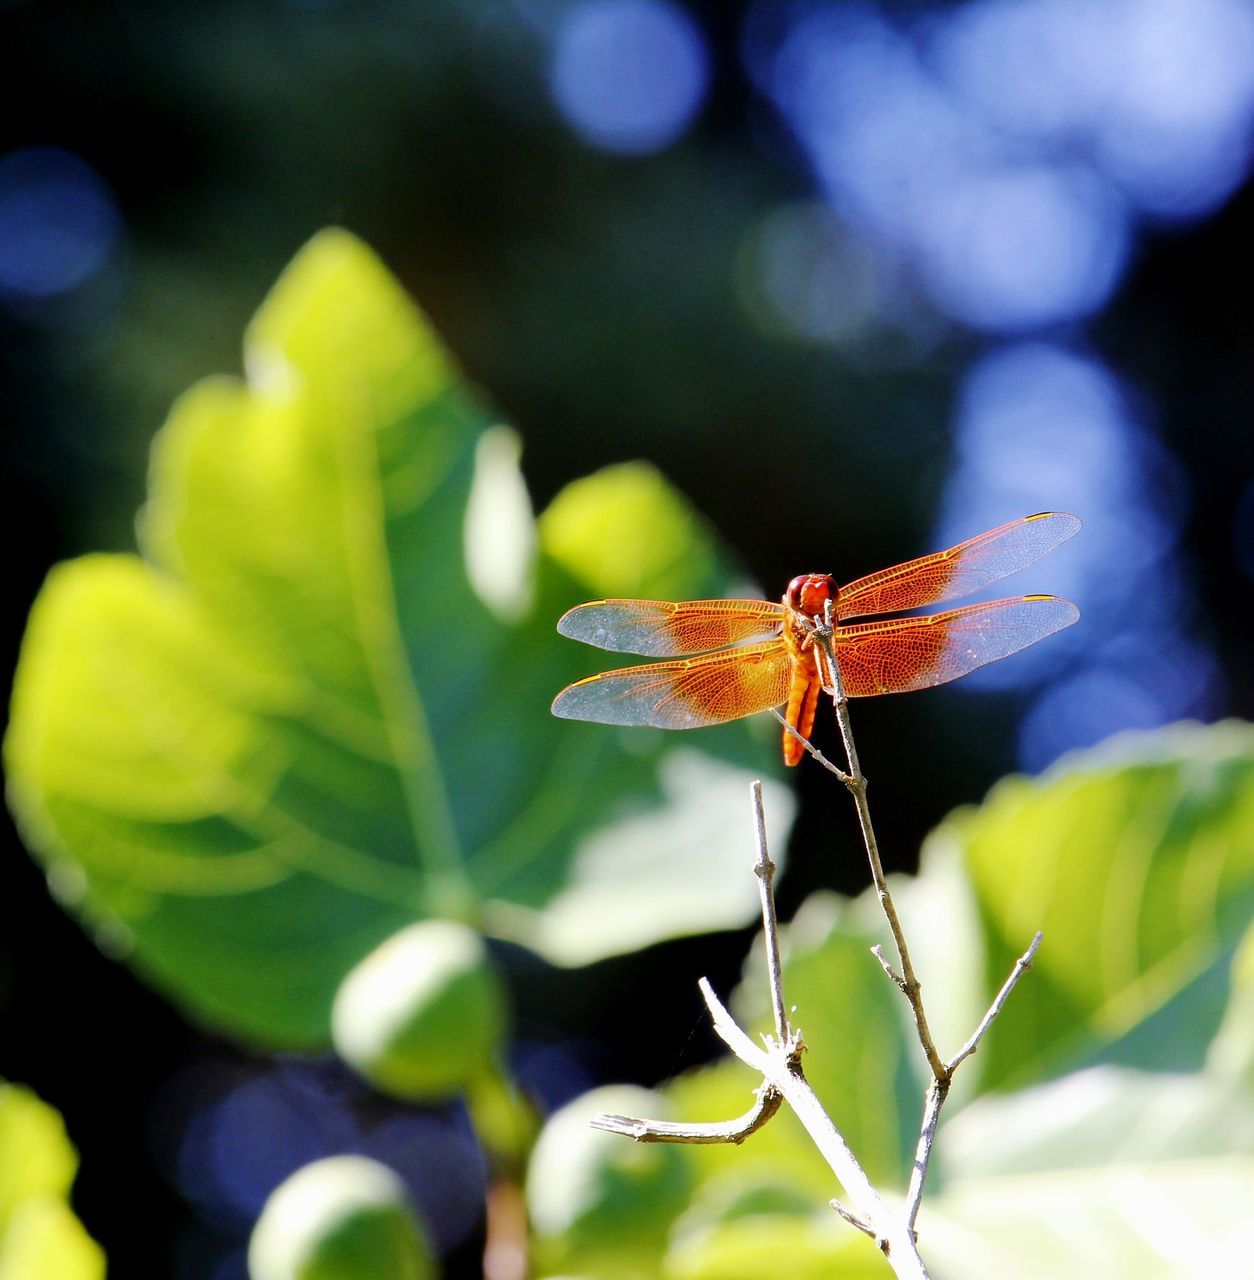 Red dragonfly perched on a twig Outside Outdoors Outdoor Photography Nature Wildlife Wildlife Photography Nature Photography Plant Life Plant Insect Dragonfly